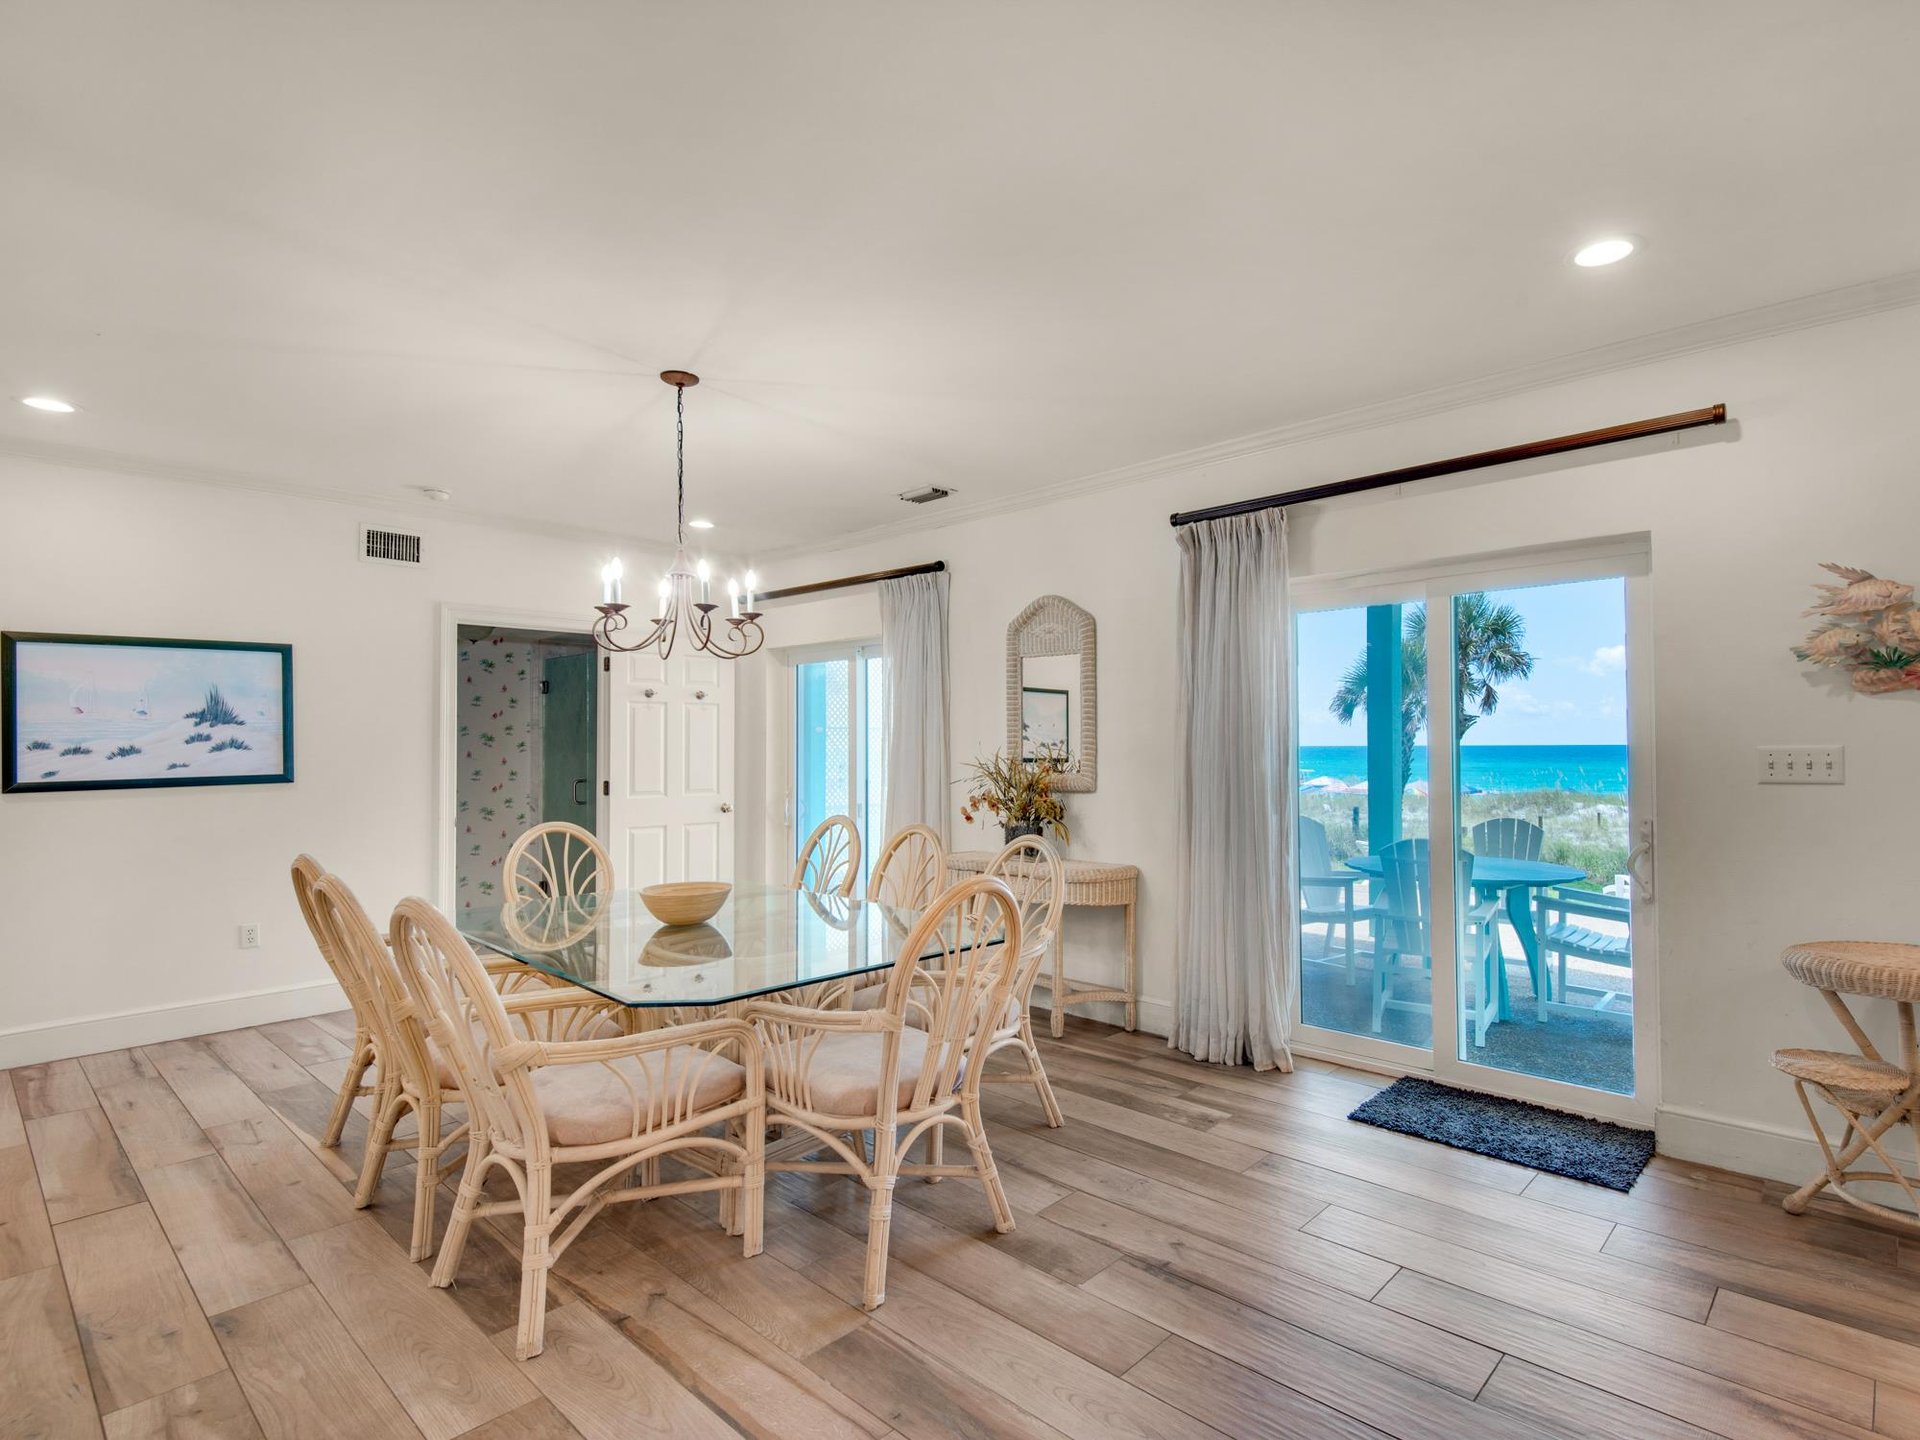 Dining Room with Gulf Views